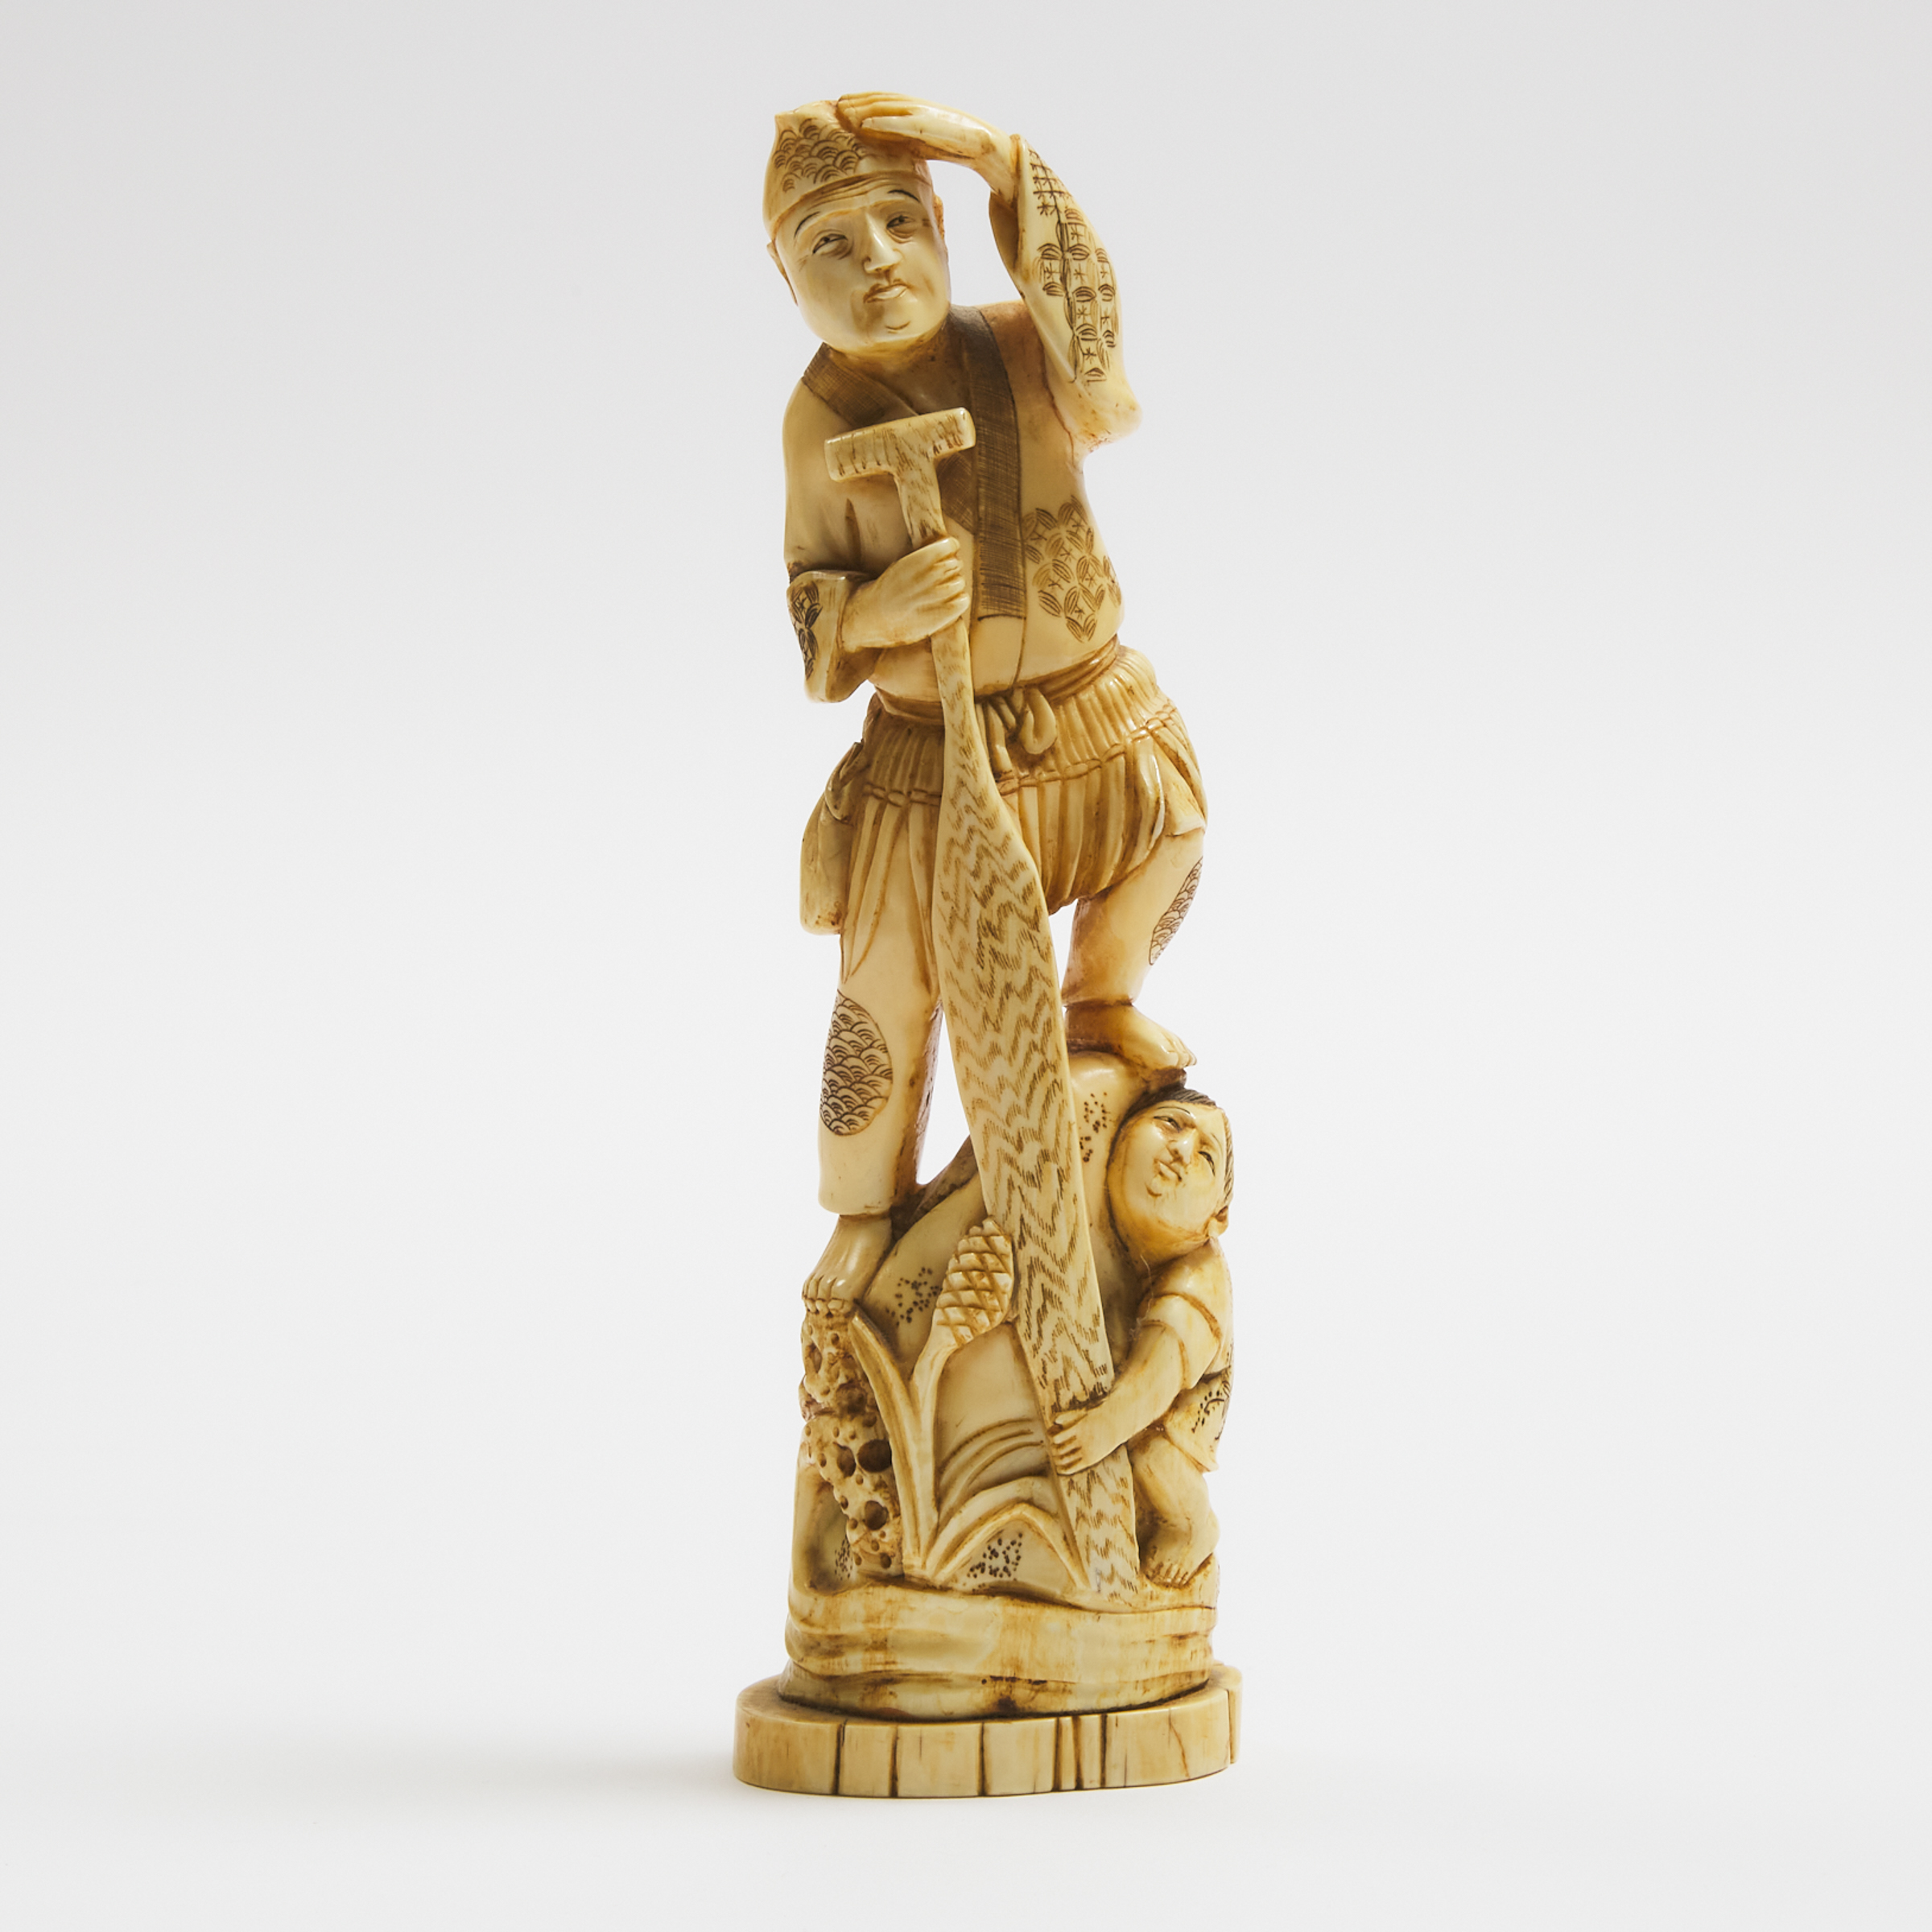 An Ivory Okimono of a Fisherman with a Paddle, Early to Mid 20th Century